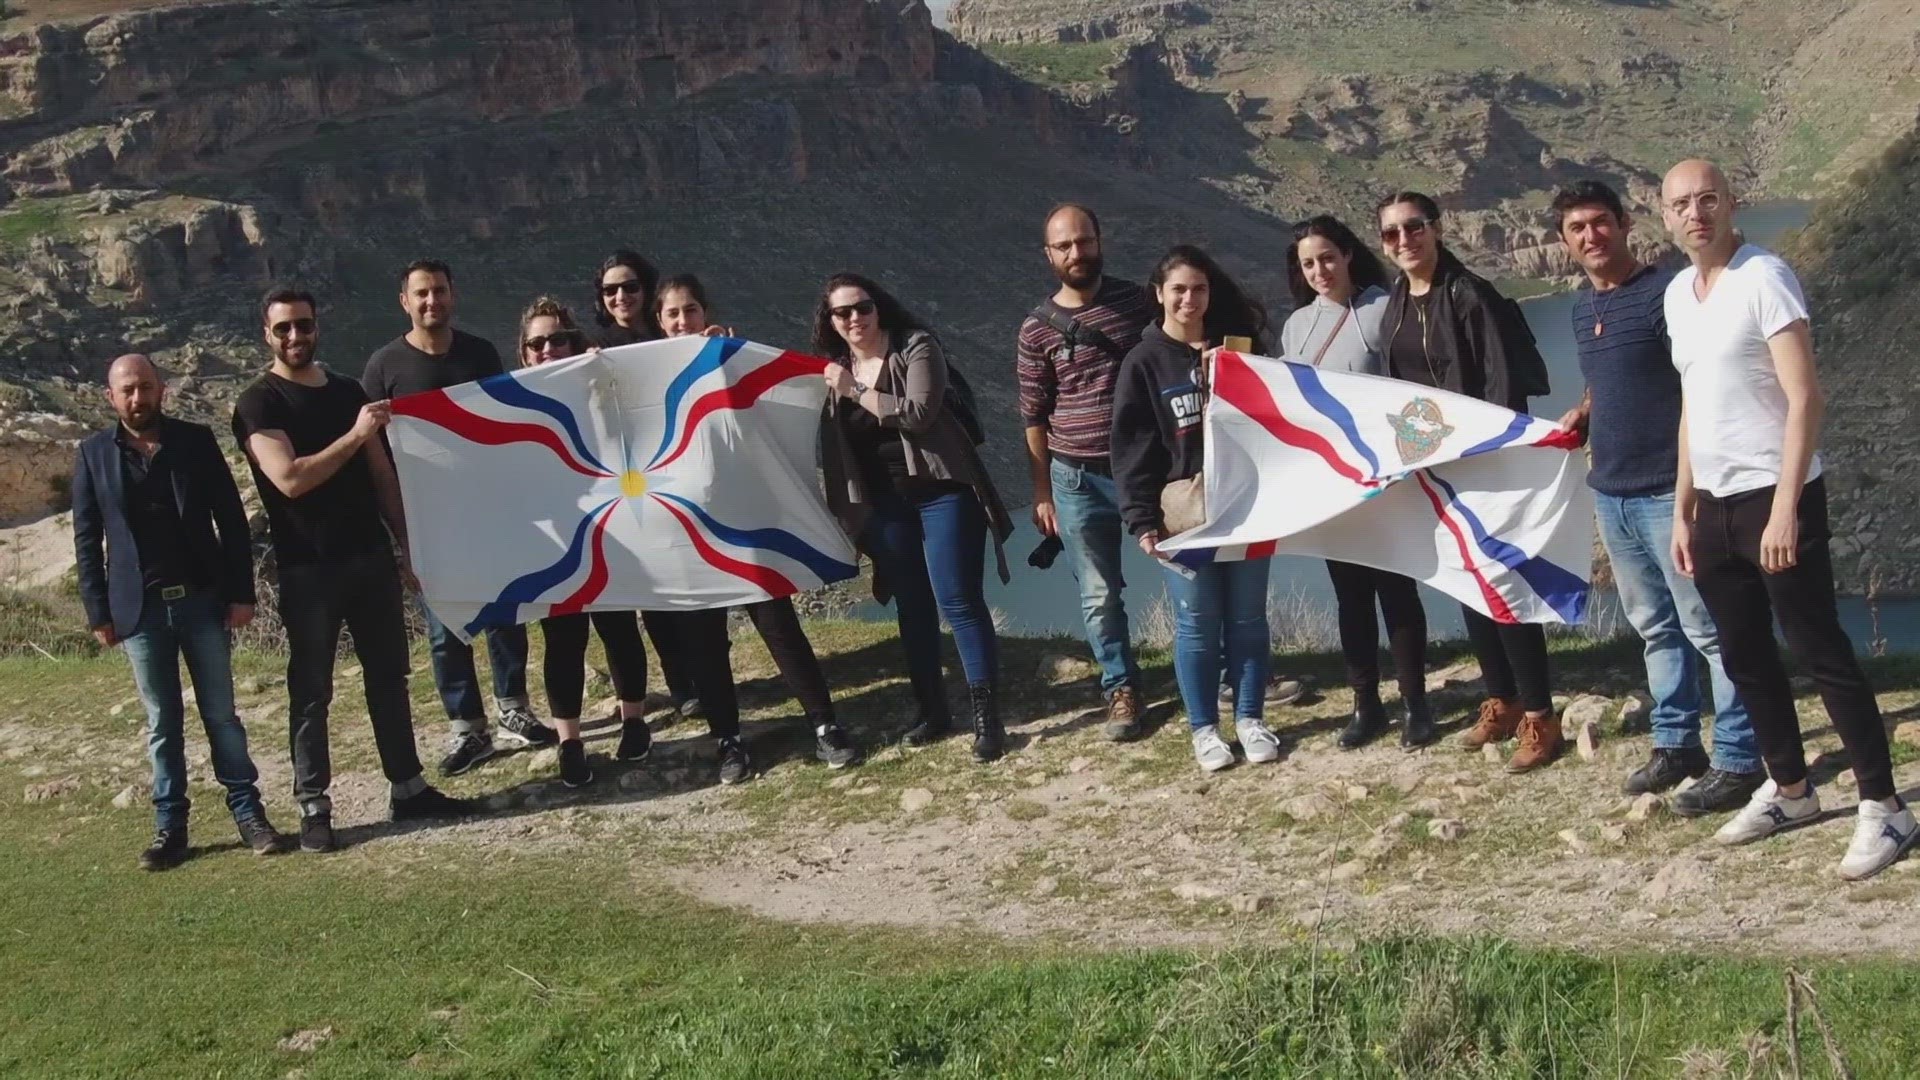 The organization's goal is to create a sustainable and far-reaching social and educational Assyrian community in Phoenix, its website said.